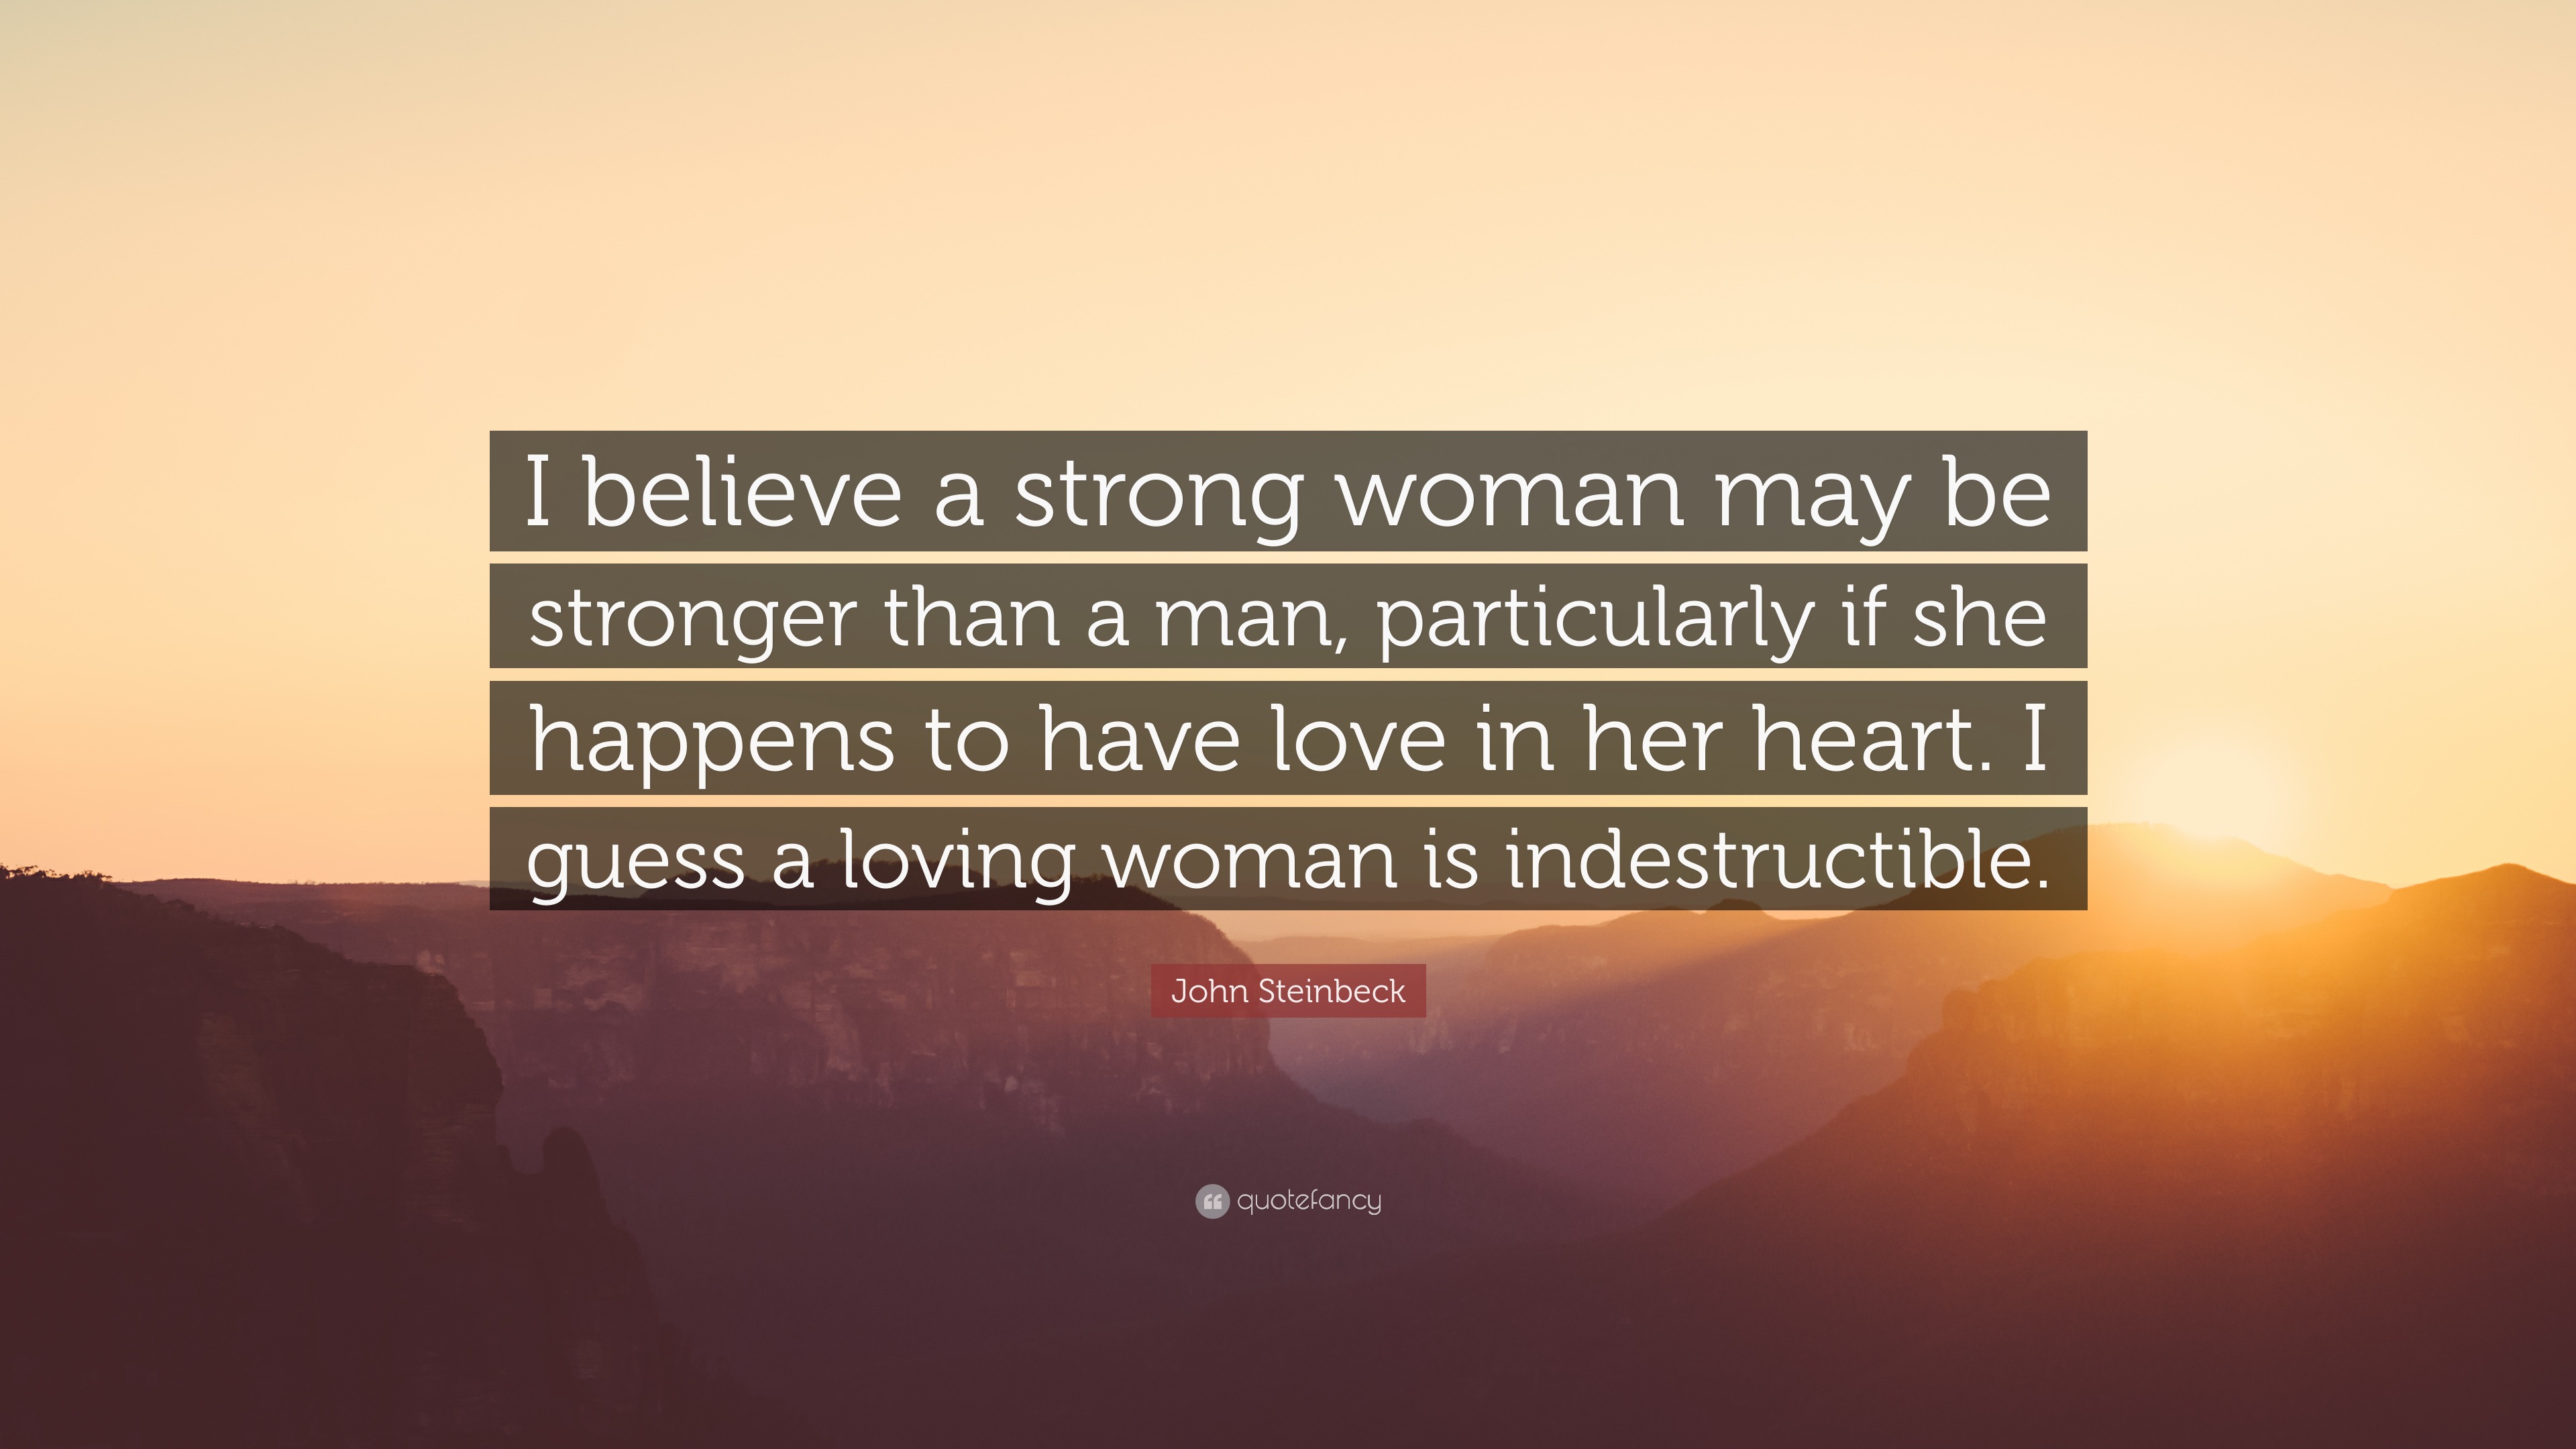 John Steinbeck Quote “I believe a strong woman may be stronger than a man